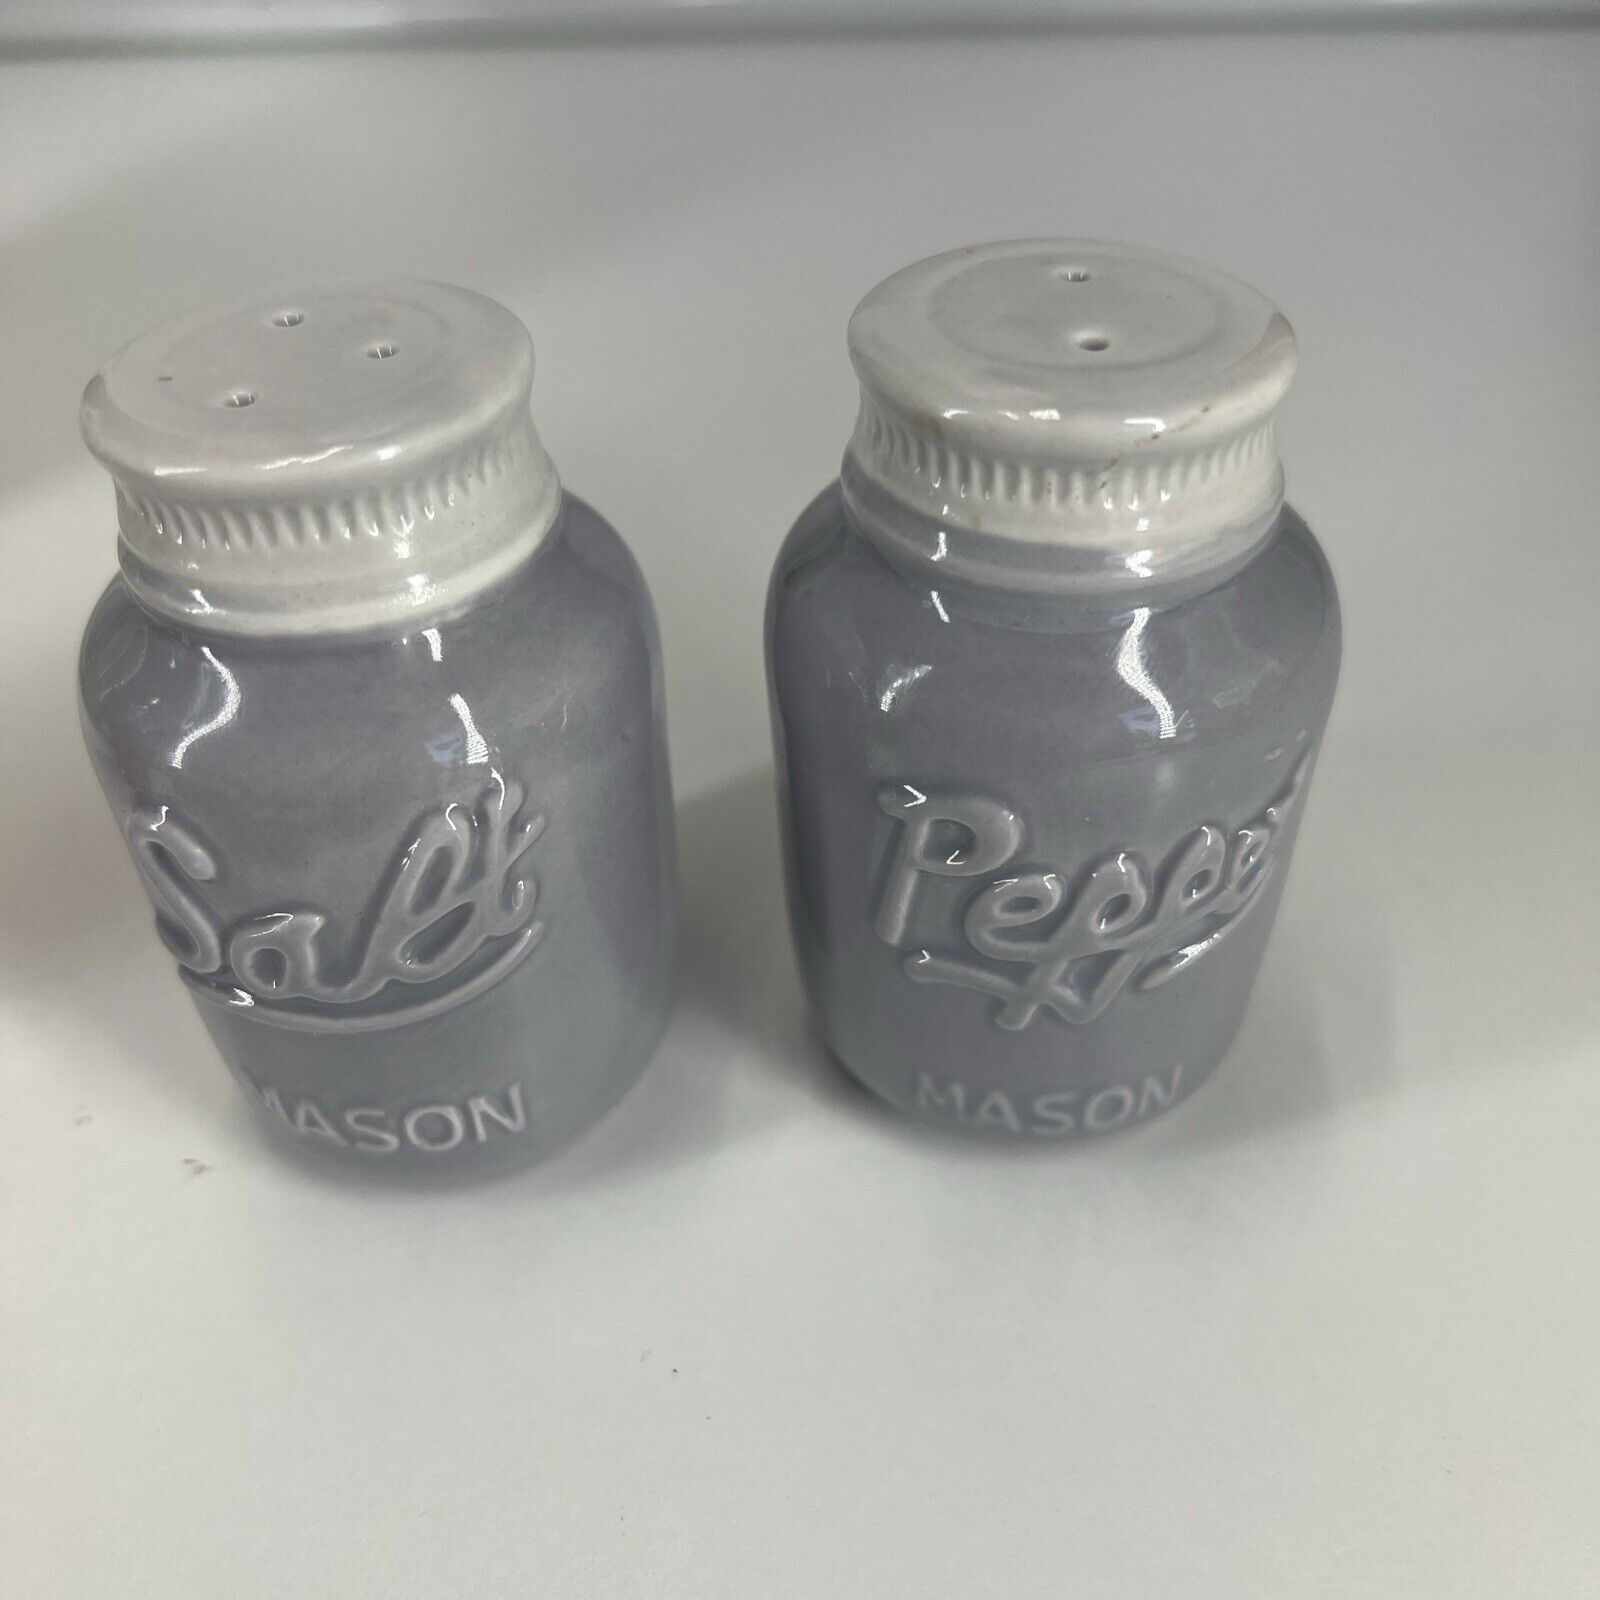 Farmhouse Vintage Salt And Pepper Shakers With Mason Logo